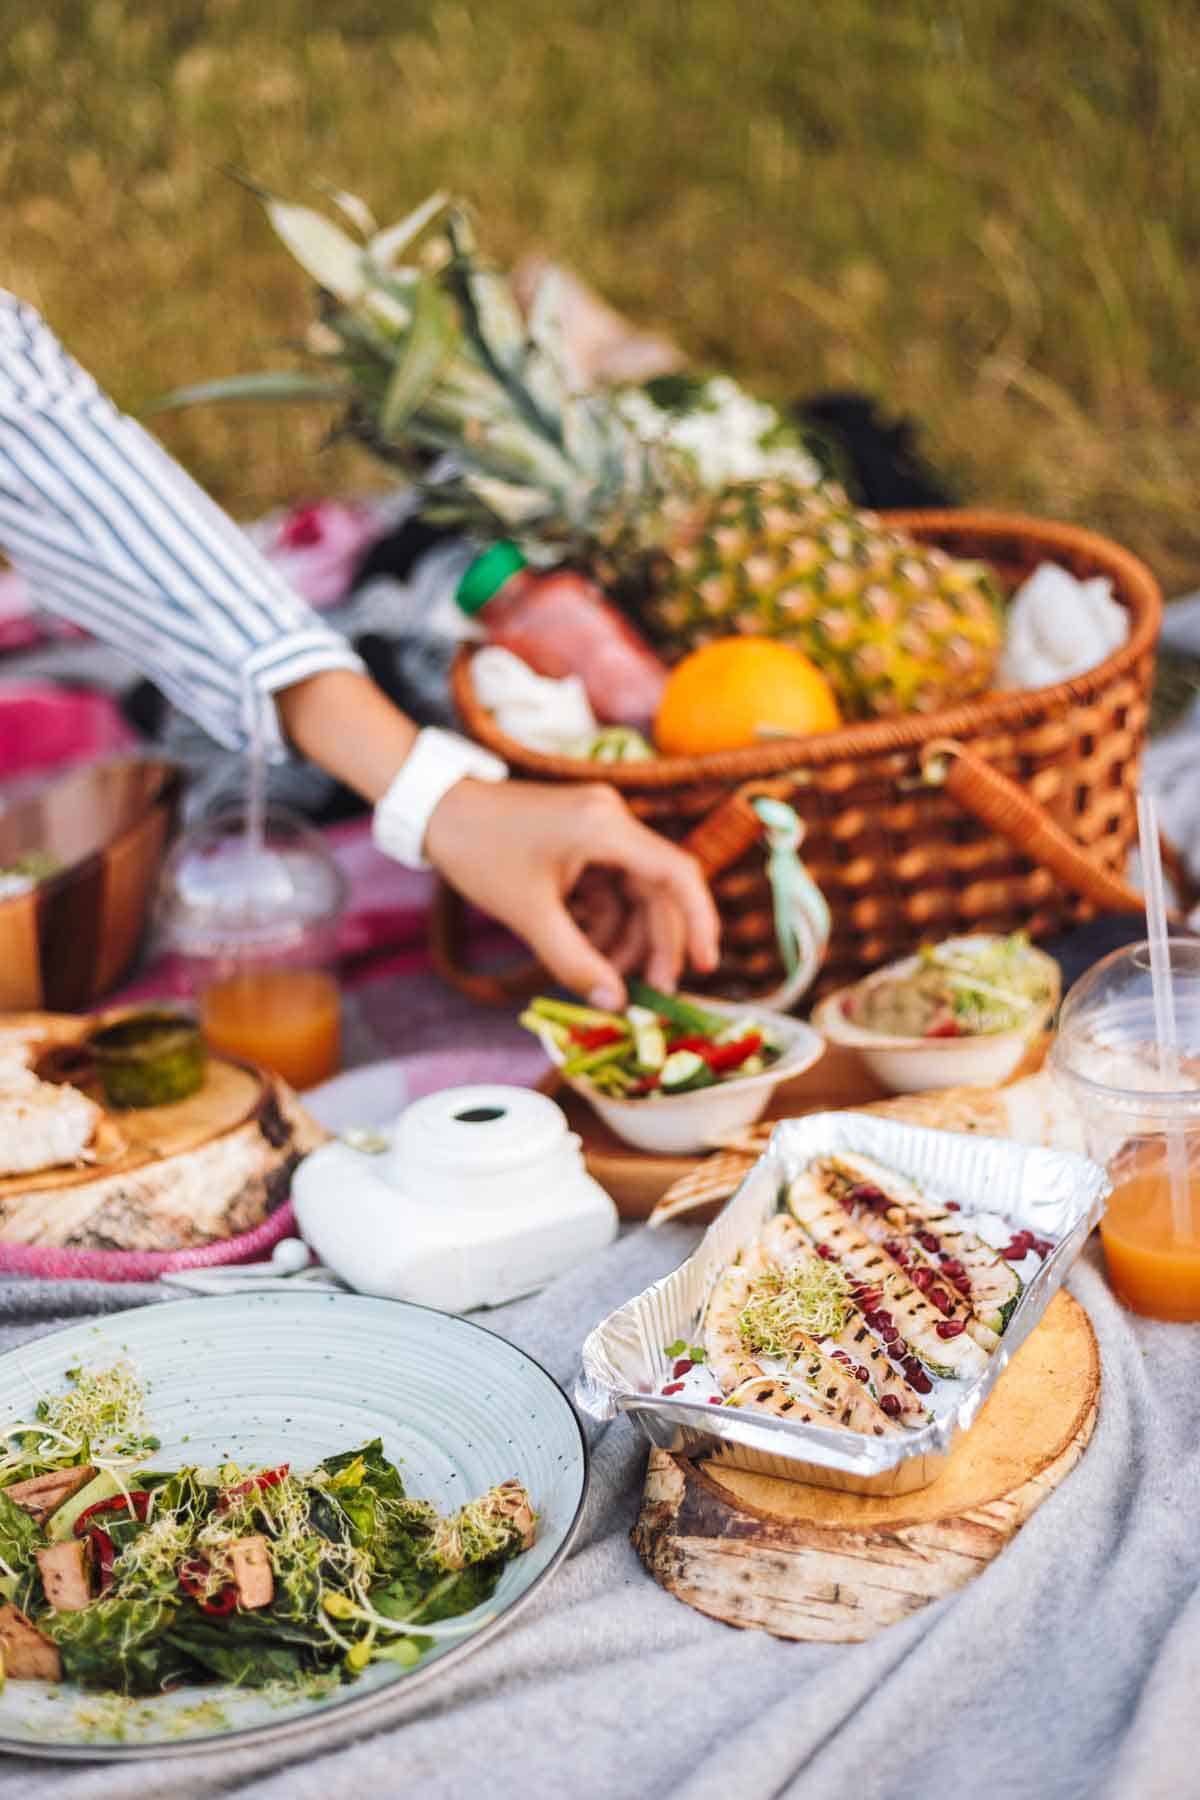 Close-up of a beautiful picnic with a variety of tasty food and fruits basket on a picnic blanket in the park.